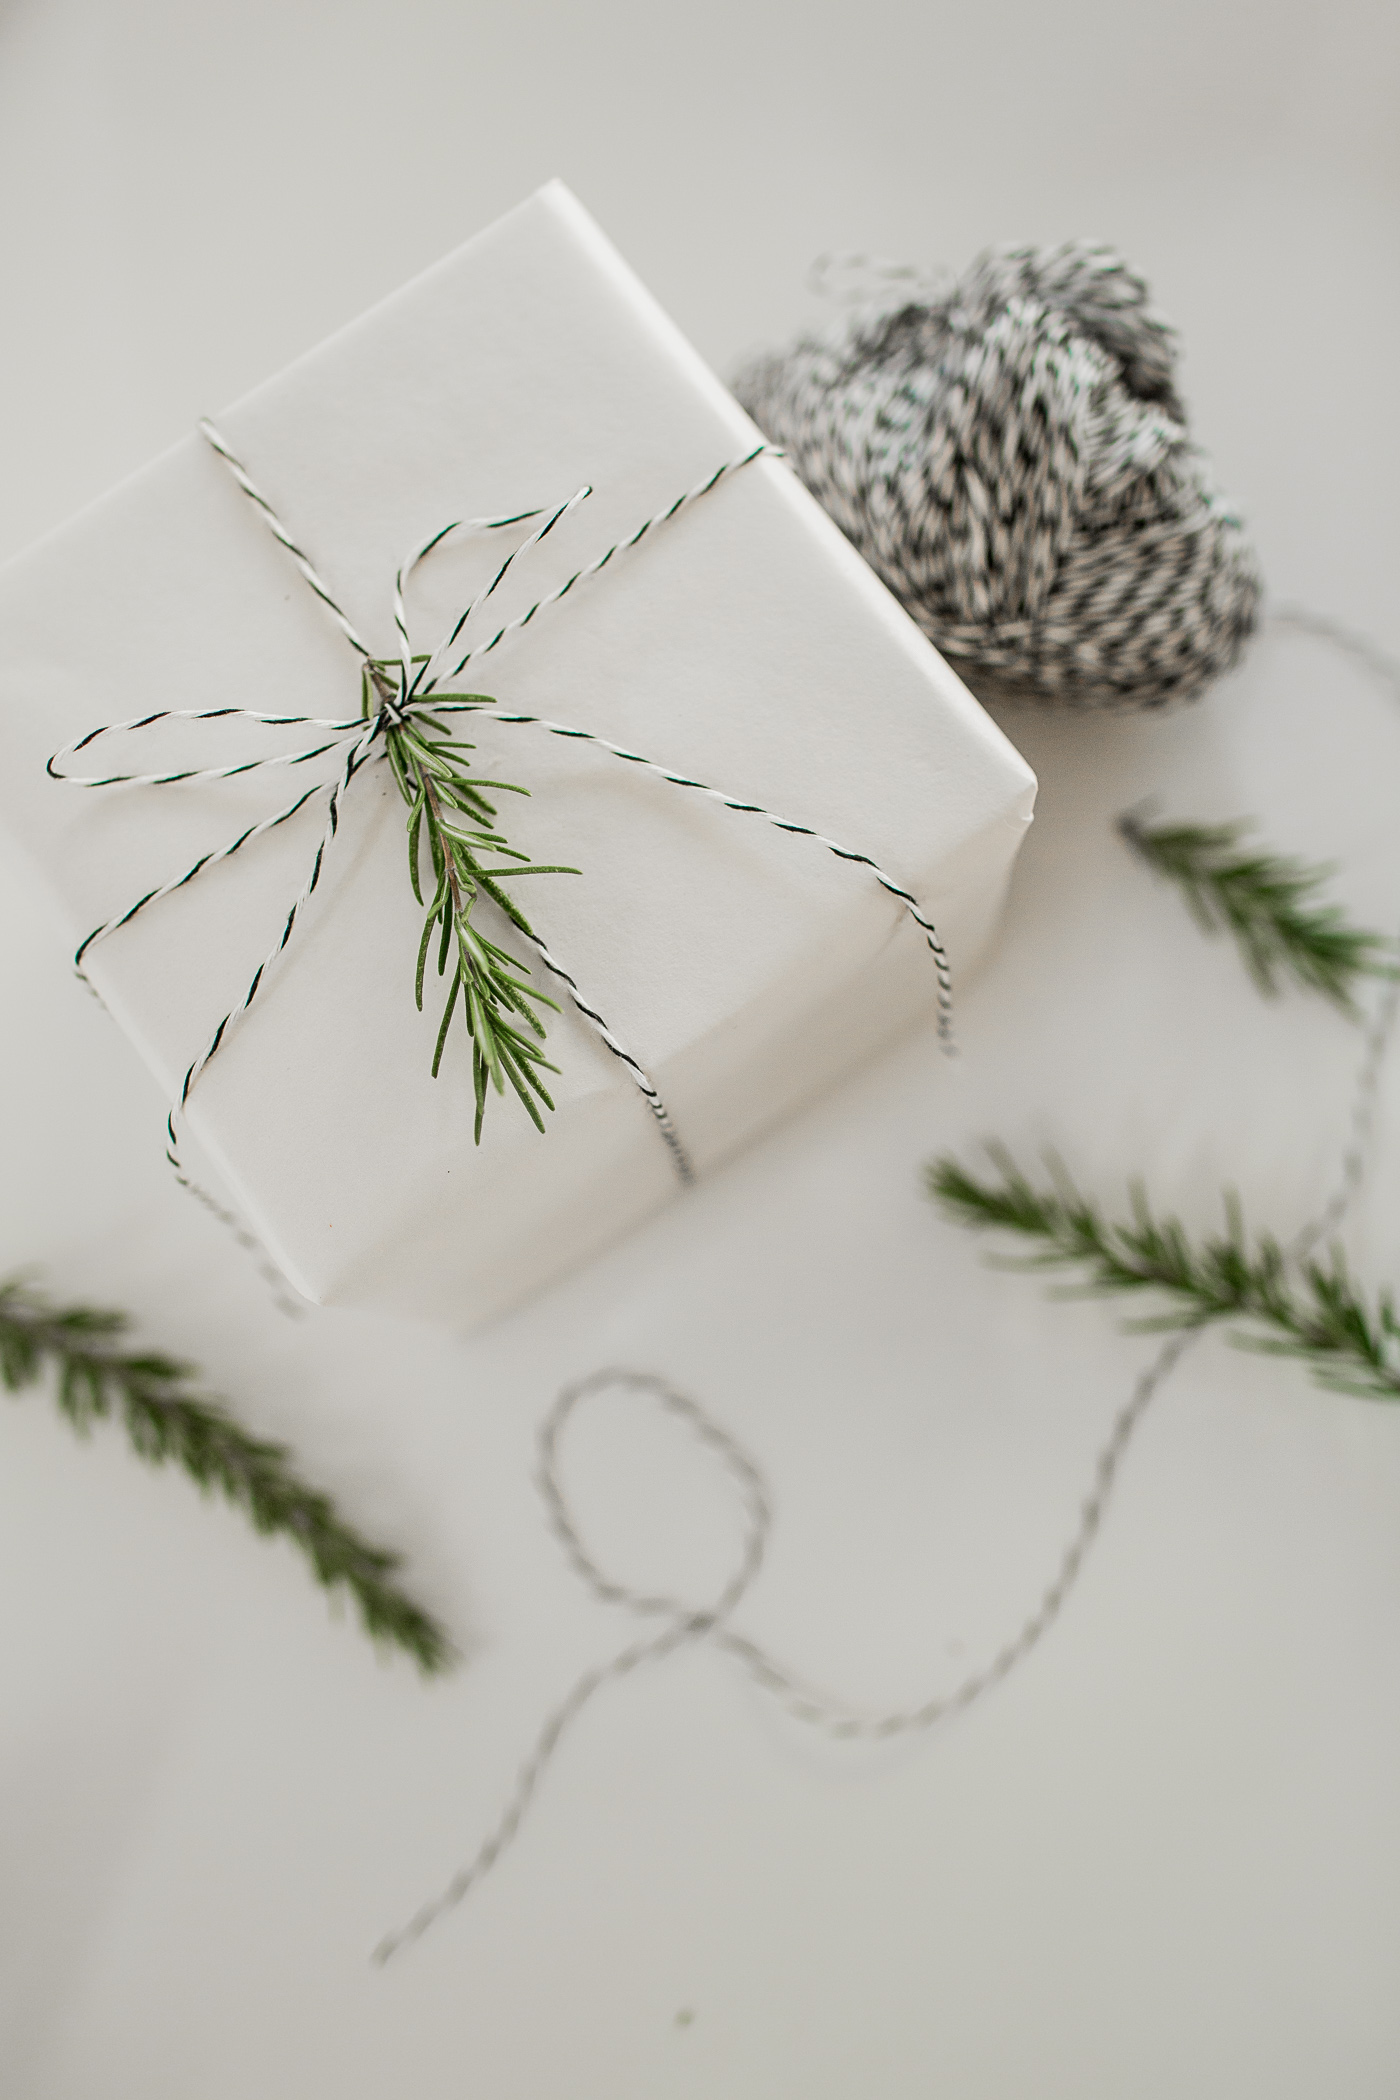 Gift wrapping tips & tricks for Christmas. Includes a how-to for tying the perfect bow!